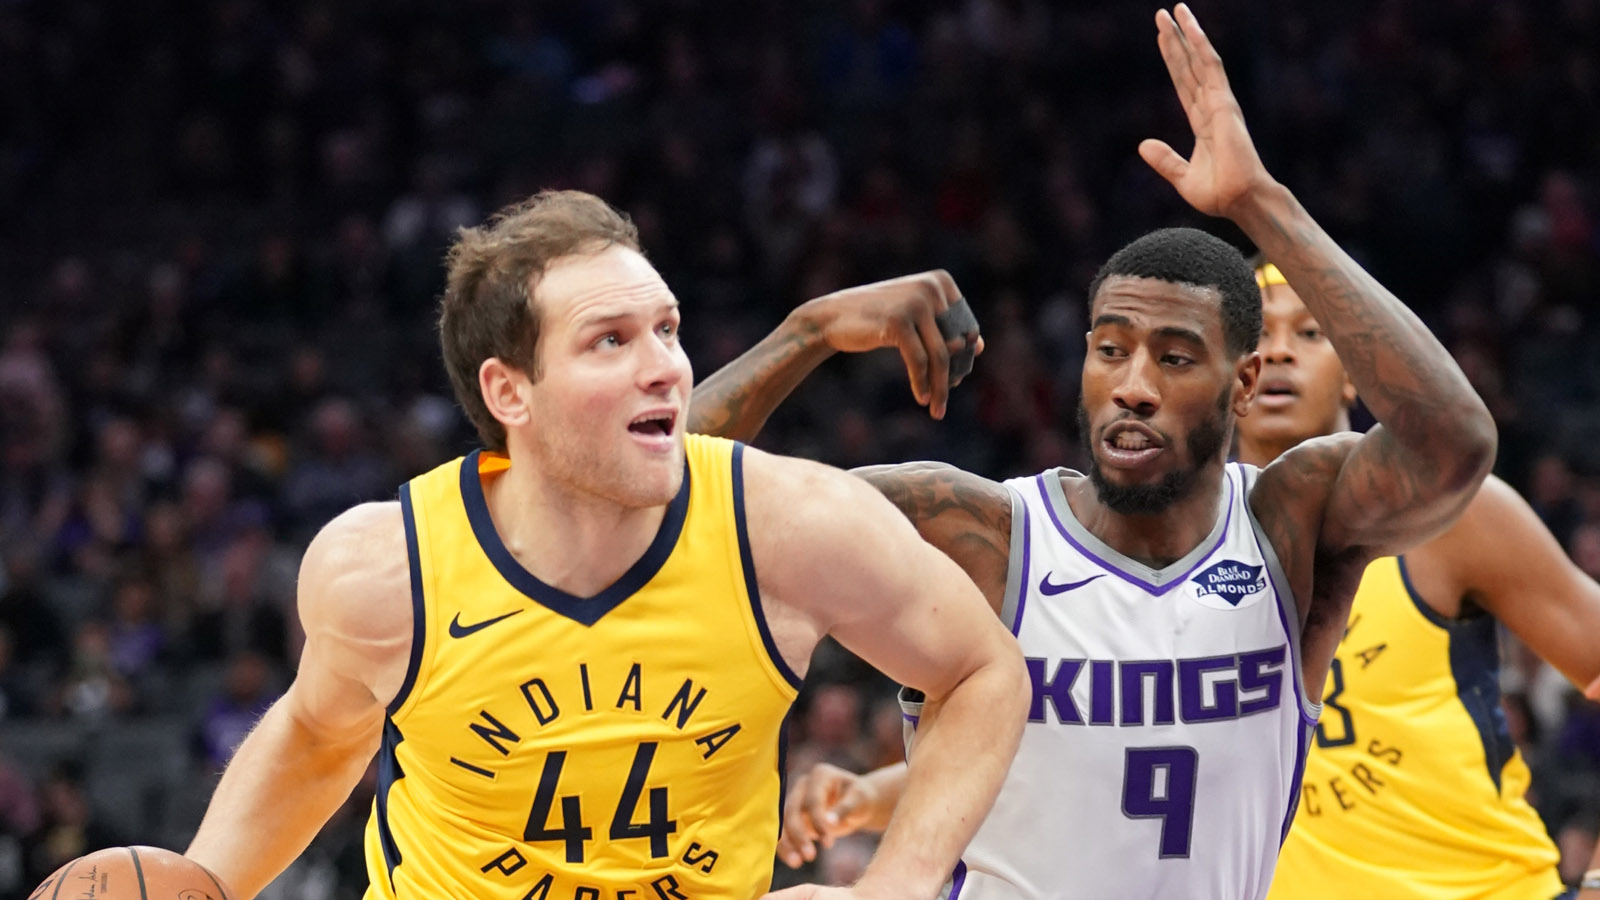 Pacers fall 111-110 in back-and-forth matchup with Kings